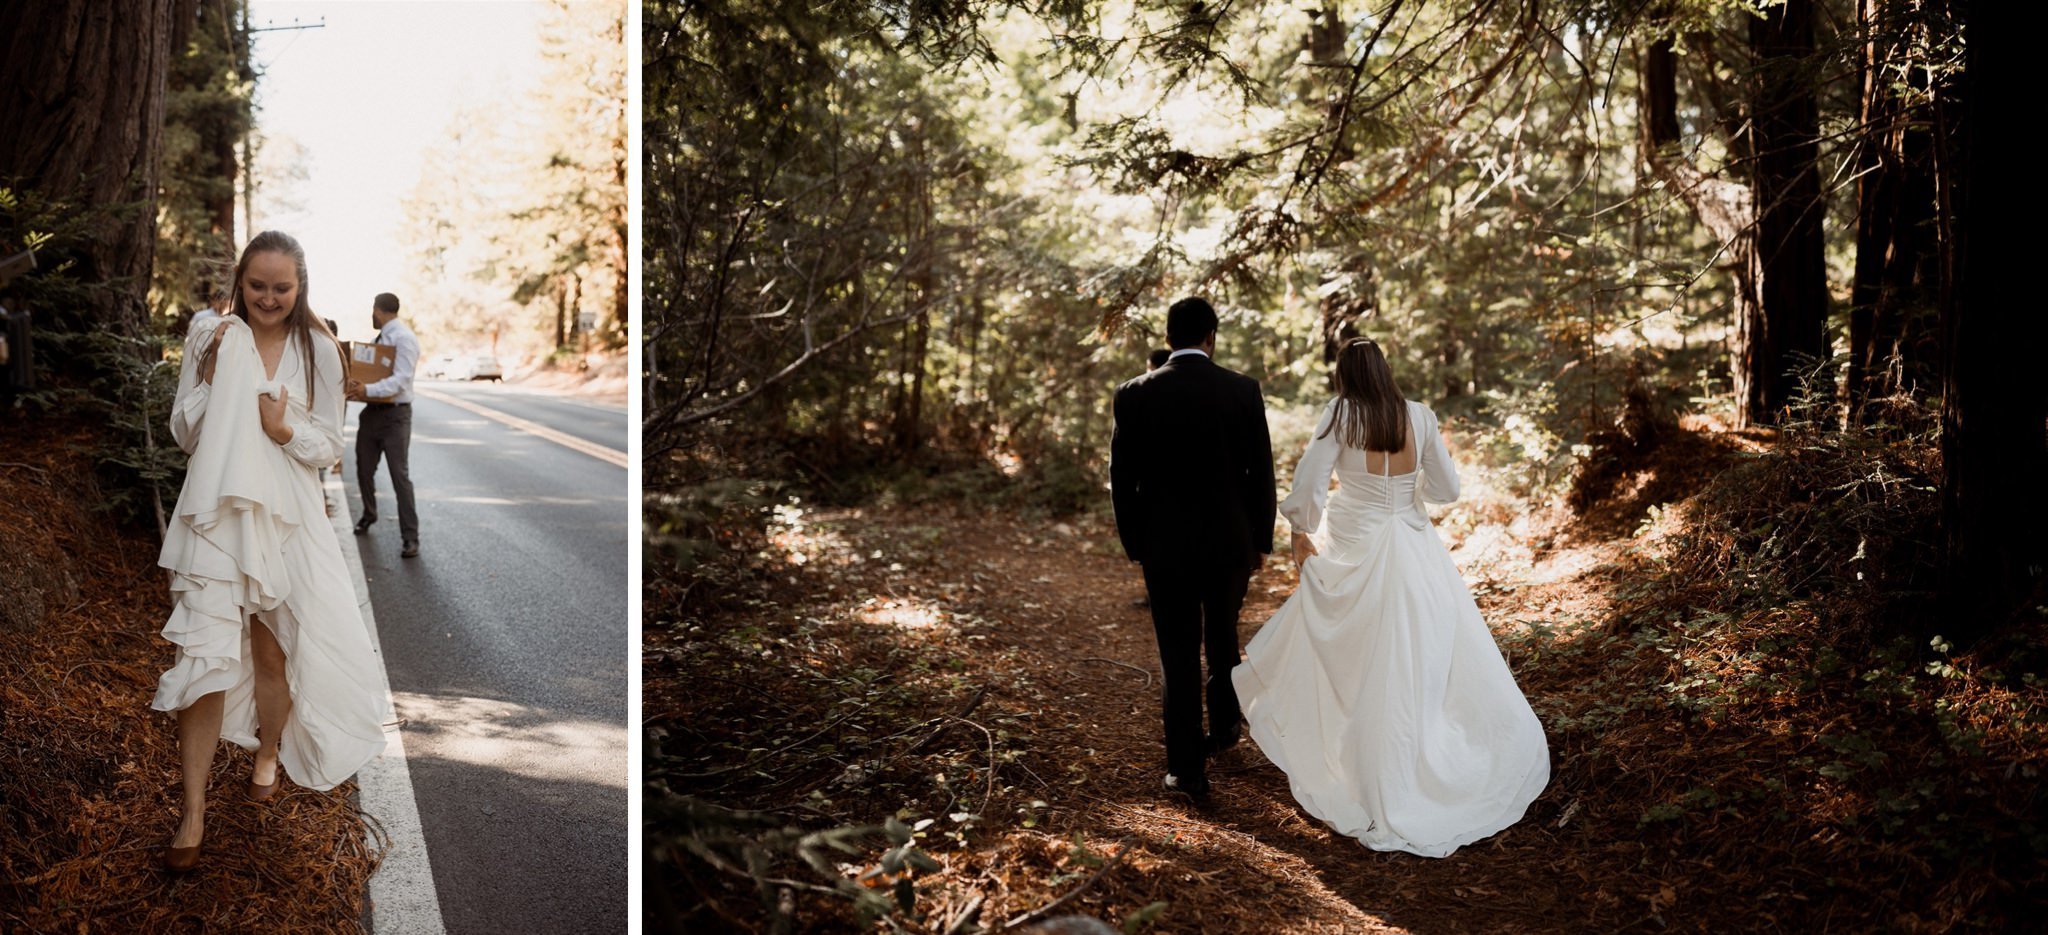 035_Two-Day Big Sur Redwoods Elopement with Family_Will Khoury Elopement Photographer.jpg